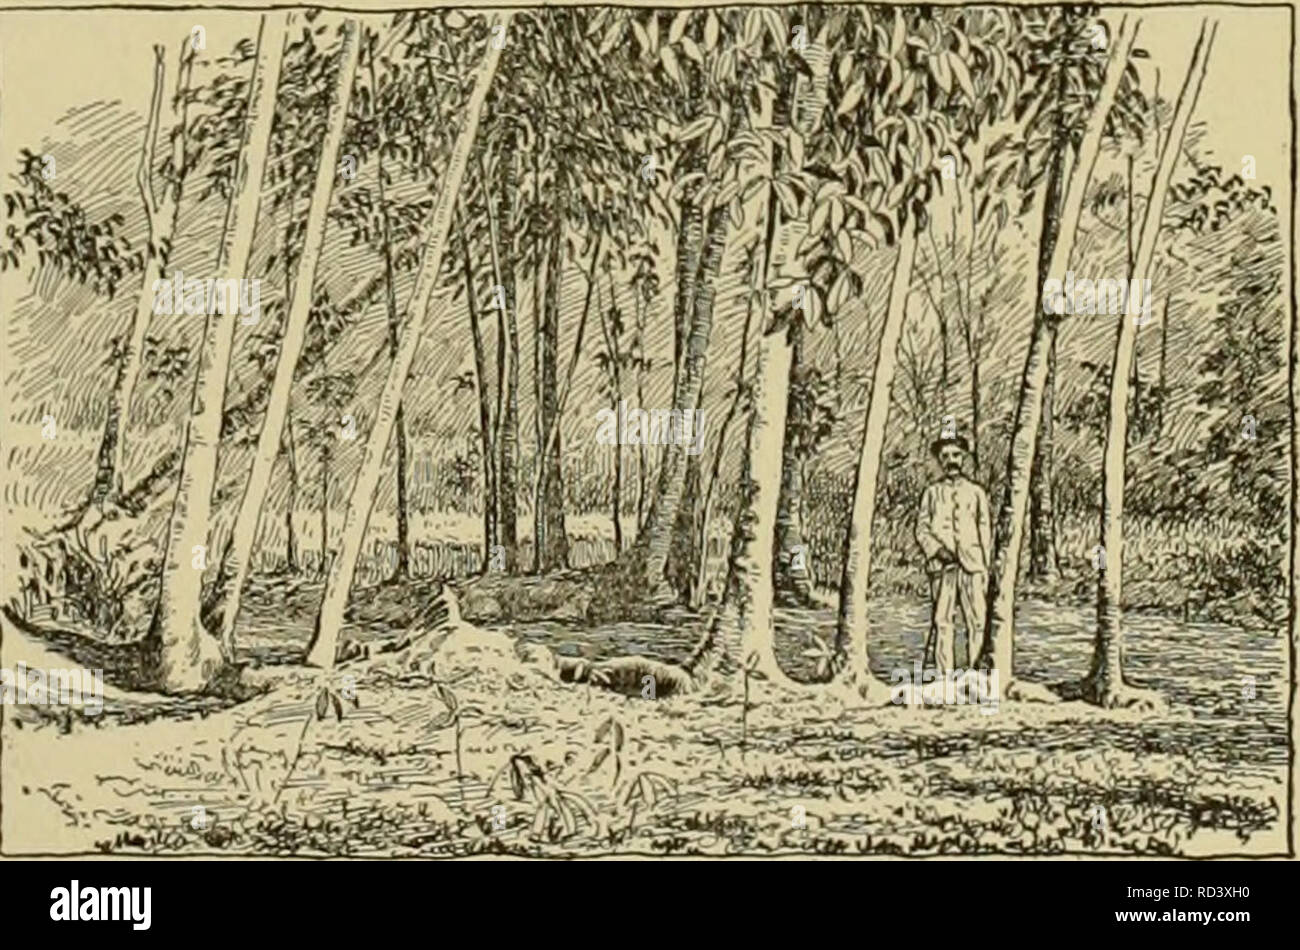 . Cyclopedia of farm crops. Farm produce; Agriculture. Fig. 797. Tapping rubber trees. where a lower temperature prevails than on the plains. In Trinidad it grows at elevation.s of 130 to 500 feet above sea level. Funtumia was for- merly known as Kickxia. (Hart.) West African rubber (Landolphia species). There are several species of this genus which yield rubber of good quality, but which do not respond readily to cultural treatment. They are for the most part high-climbing plants requir- ing the support of trees. The latex or rubber coagulates almost as soon as it exudes. It may be formed int Stock Photo